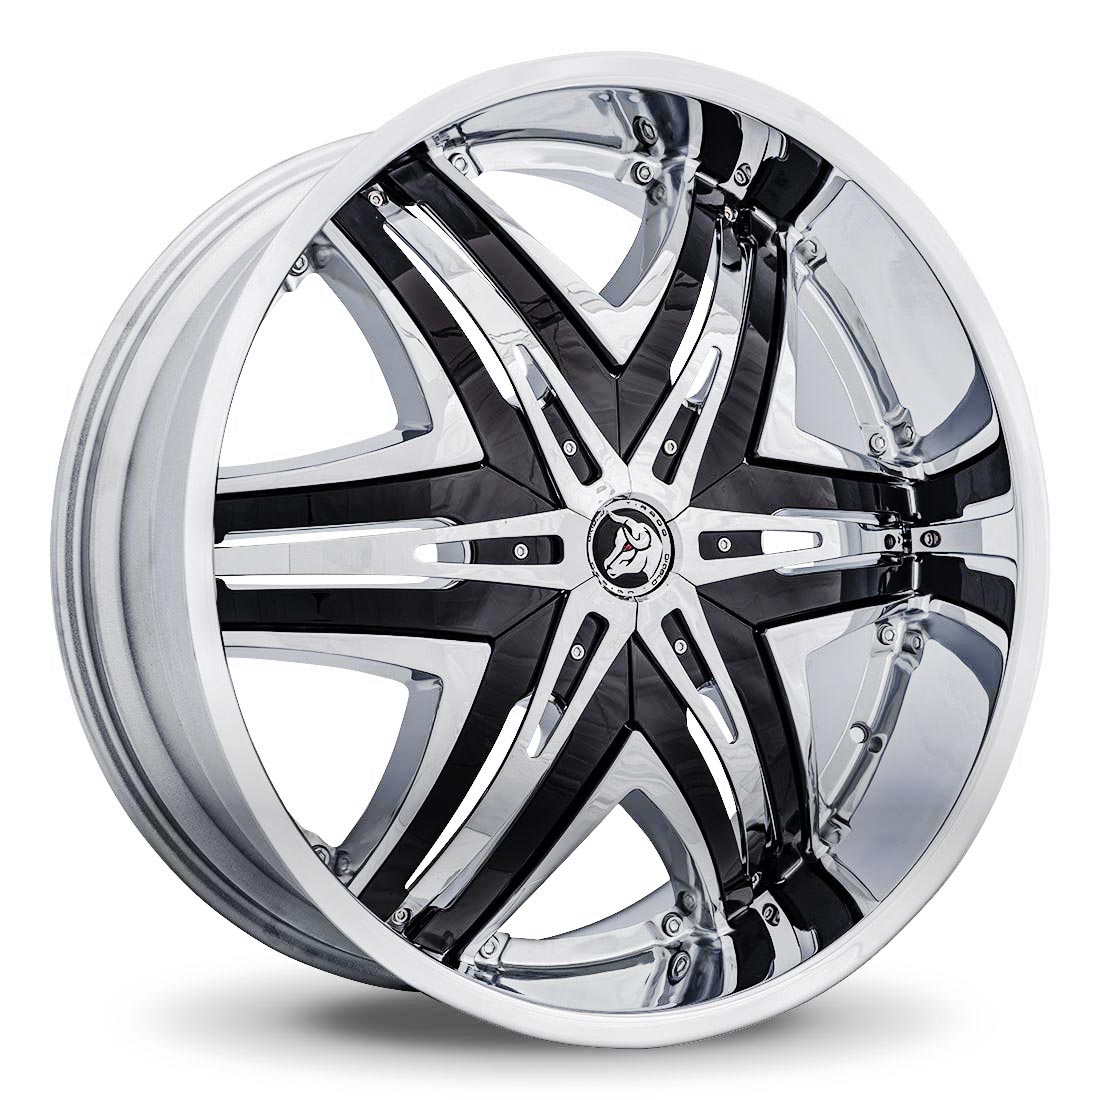 ELITE  WHEELS AND RIMS PACKAGES